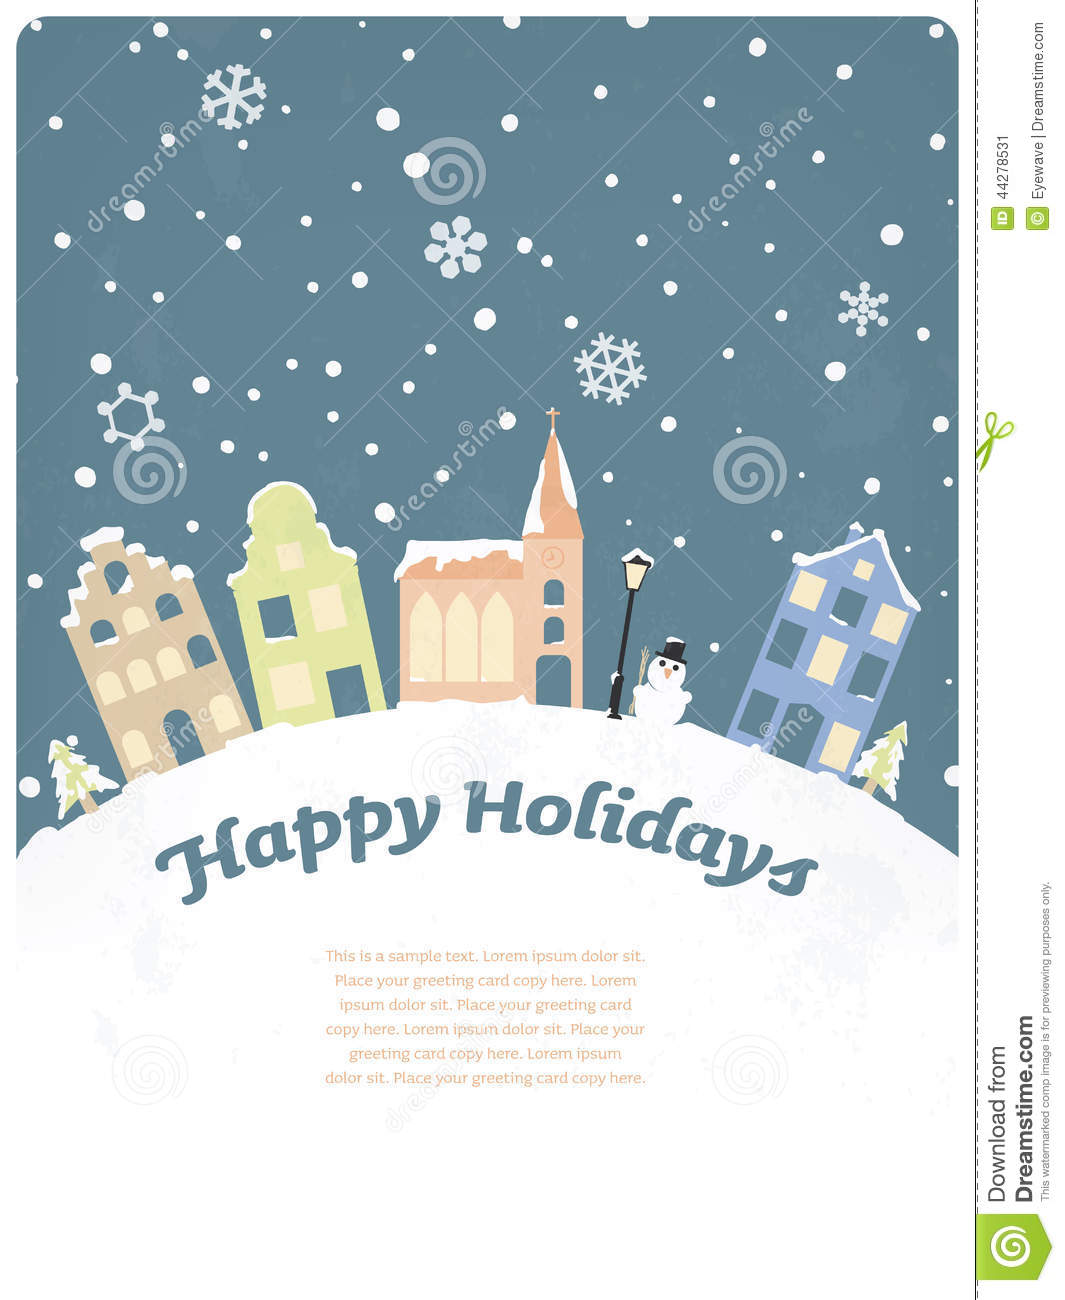 17 Happy Holidays Greeting Card Vector Images